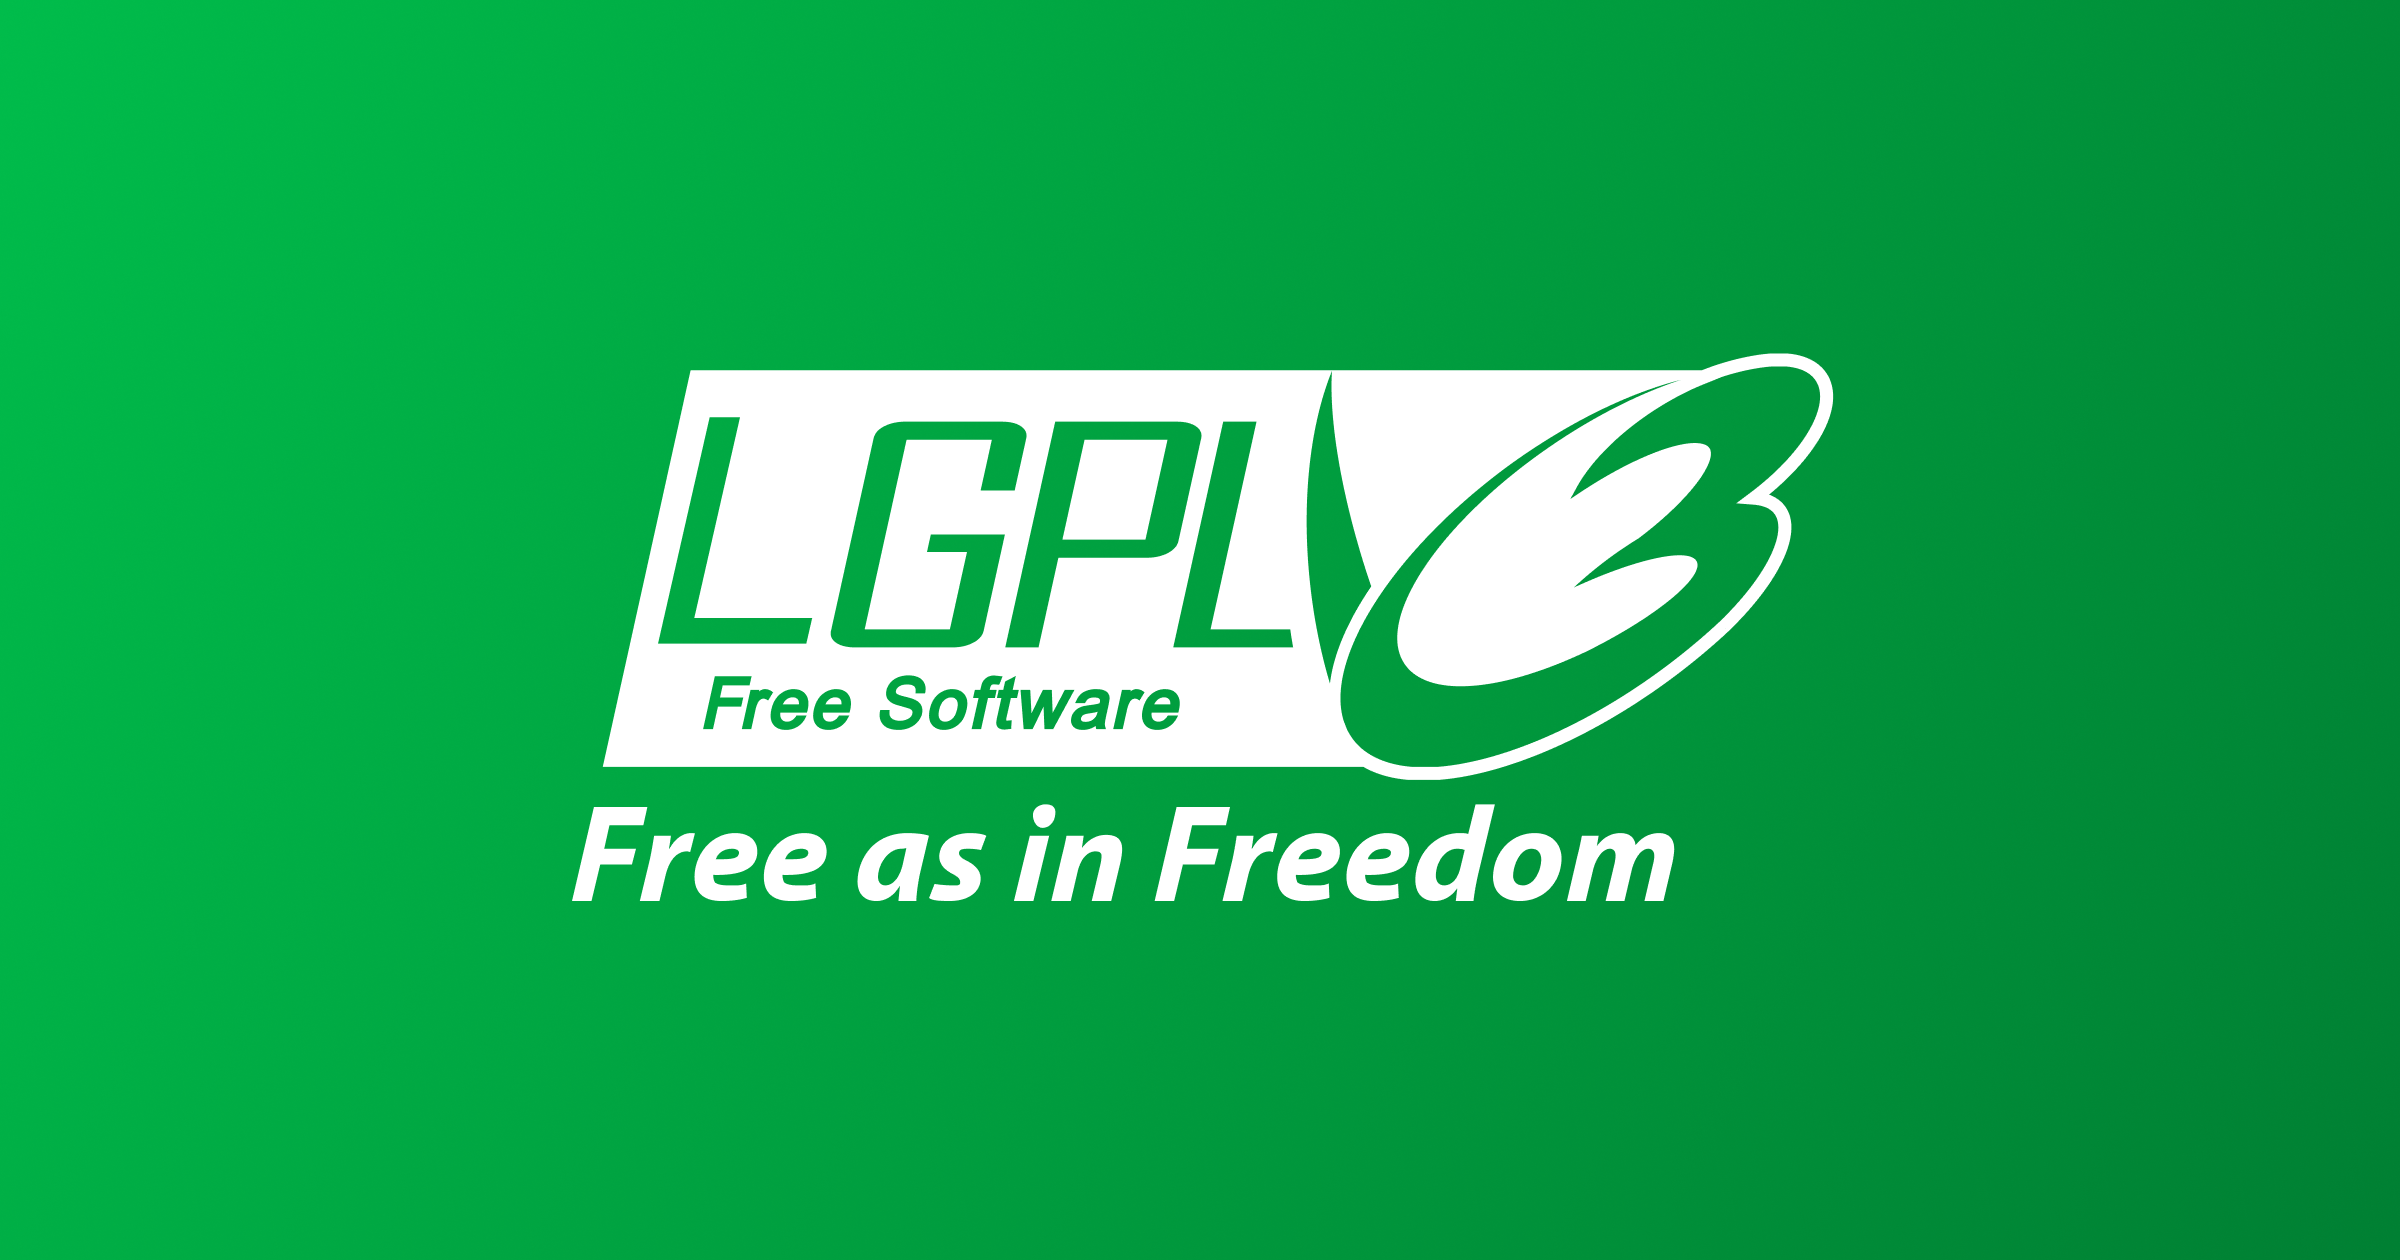 Open Source Software Licenses 101: The LGPL License